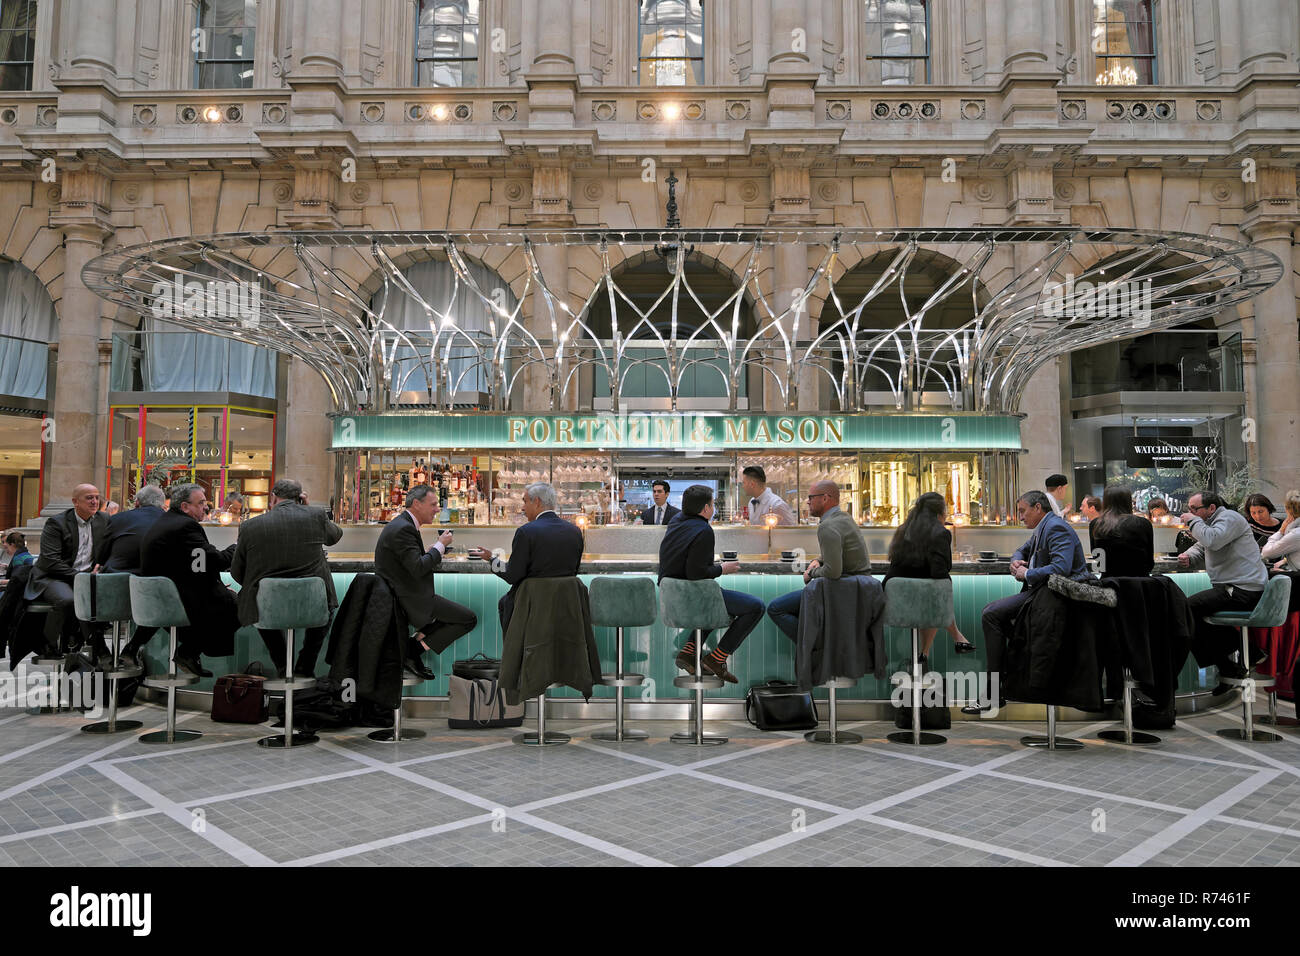 Fortnum & Mason bar at Christmas time businessmen and women sitting inside the Royal Exchange and Bank of England City of London UK  KATHY DEWITT Stock Photo